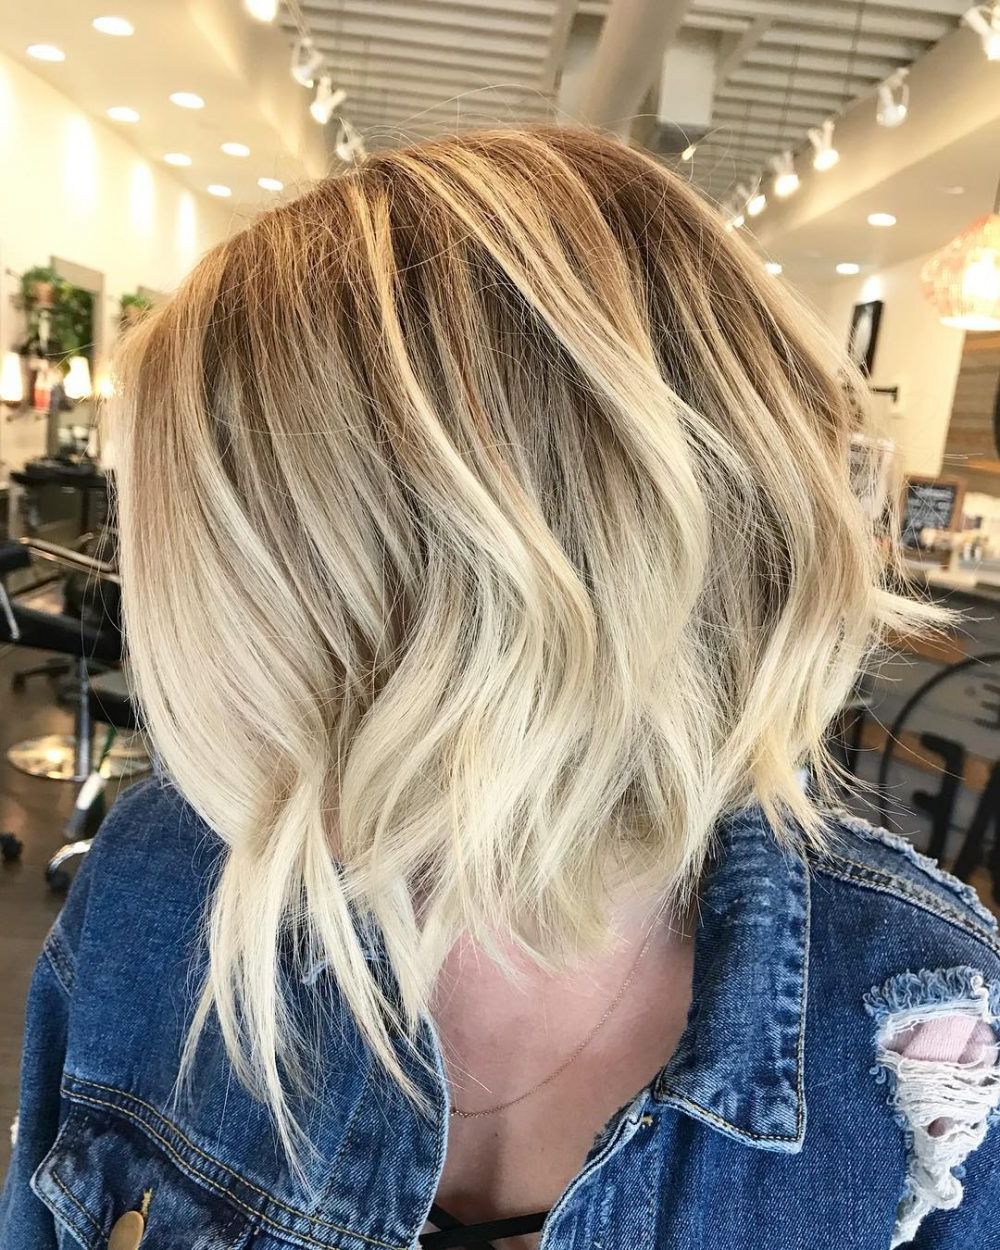 34 Best Choppy Layered Hairstyles (that Will Flatter Anyone) Within 2017 Blonde Lob Hairstyles With Disconnected Jagged Layers (View 12 of 20)